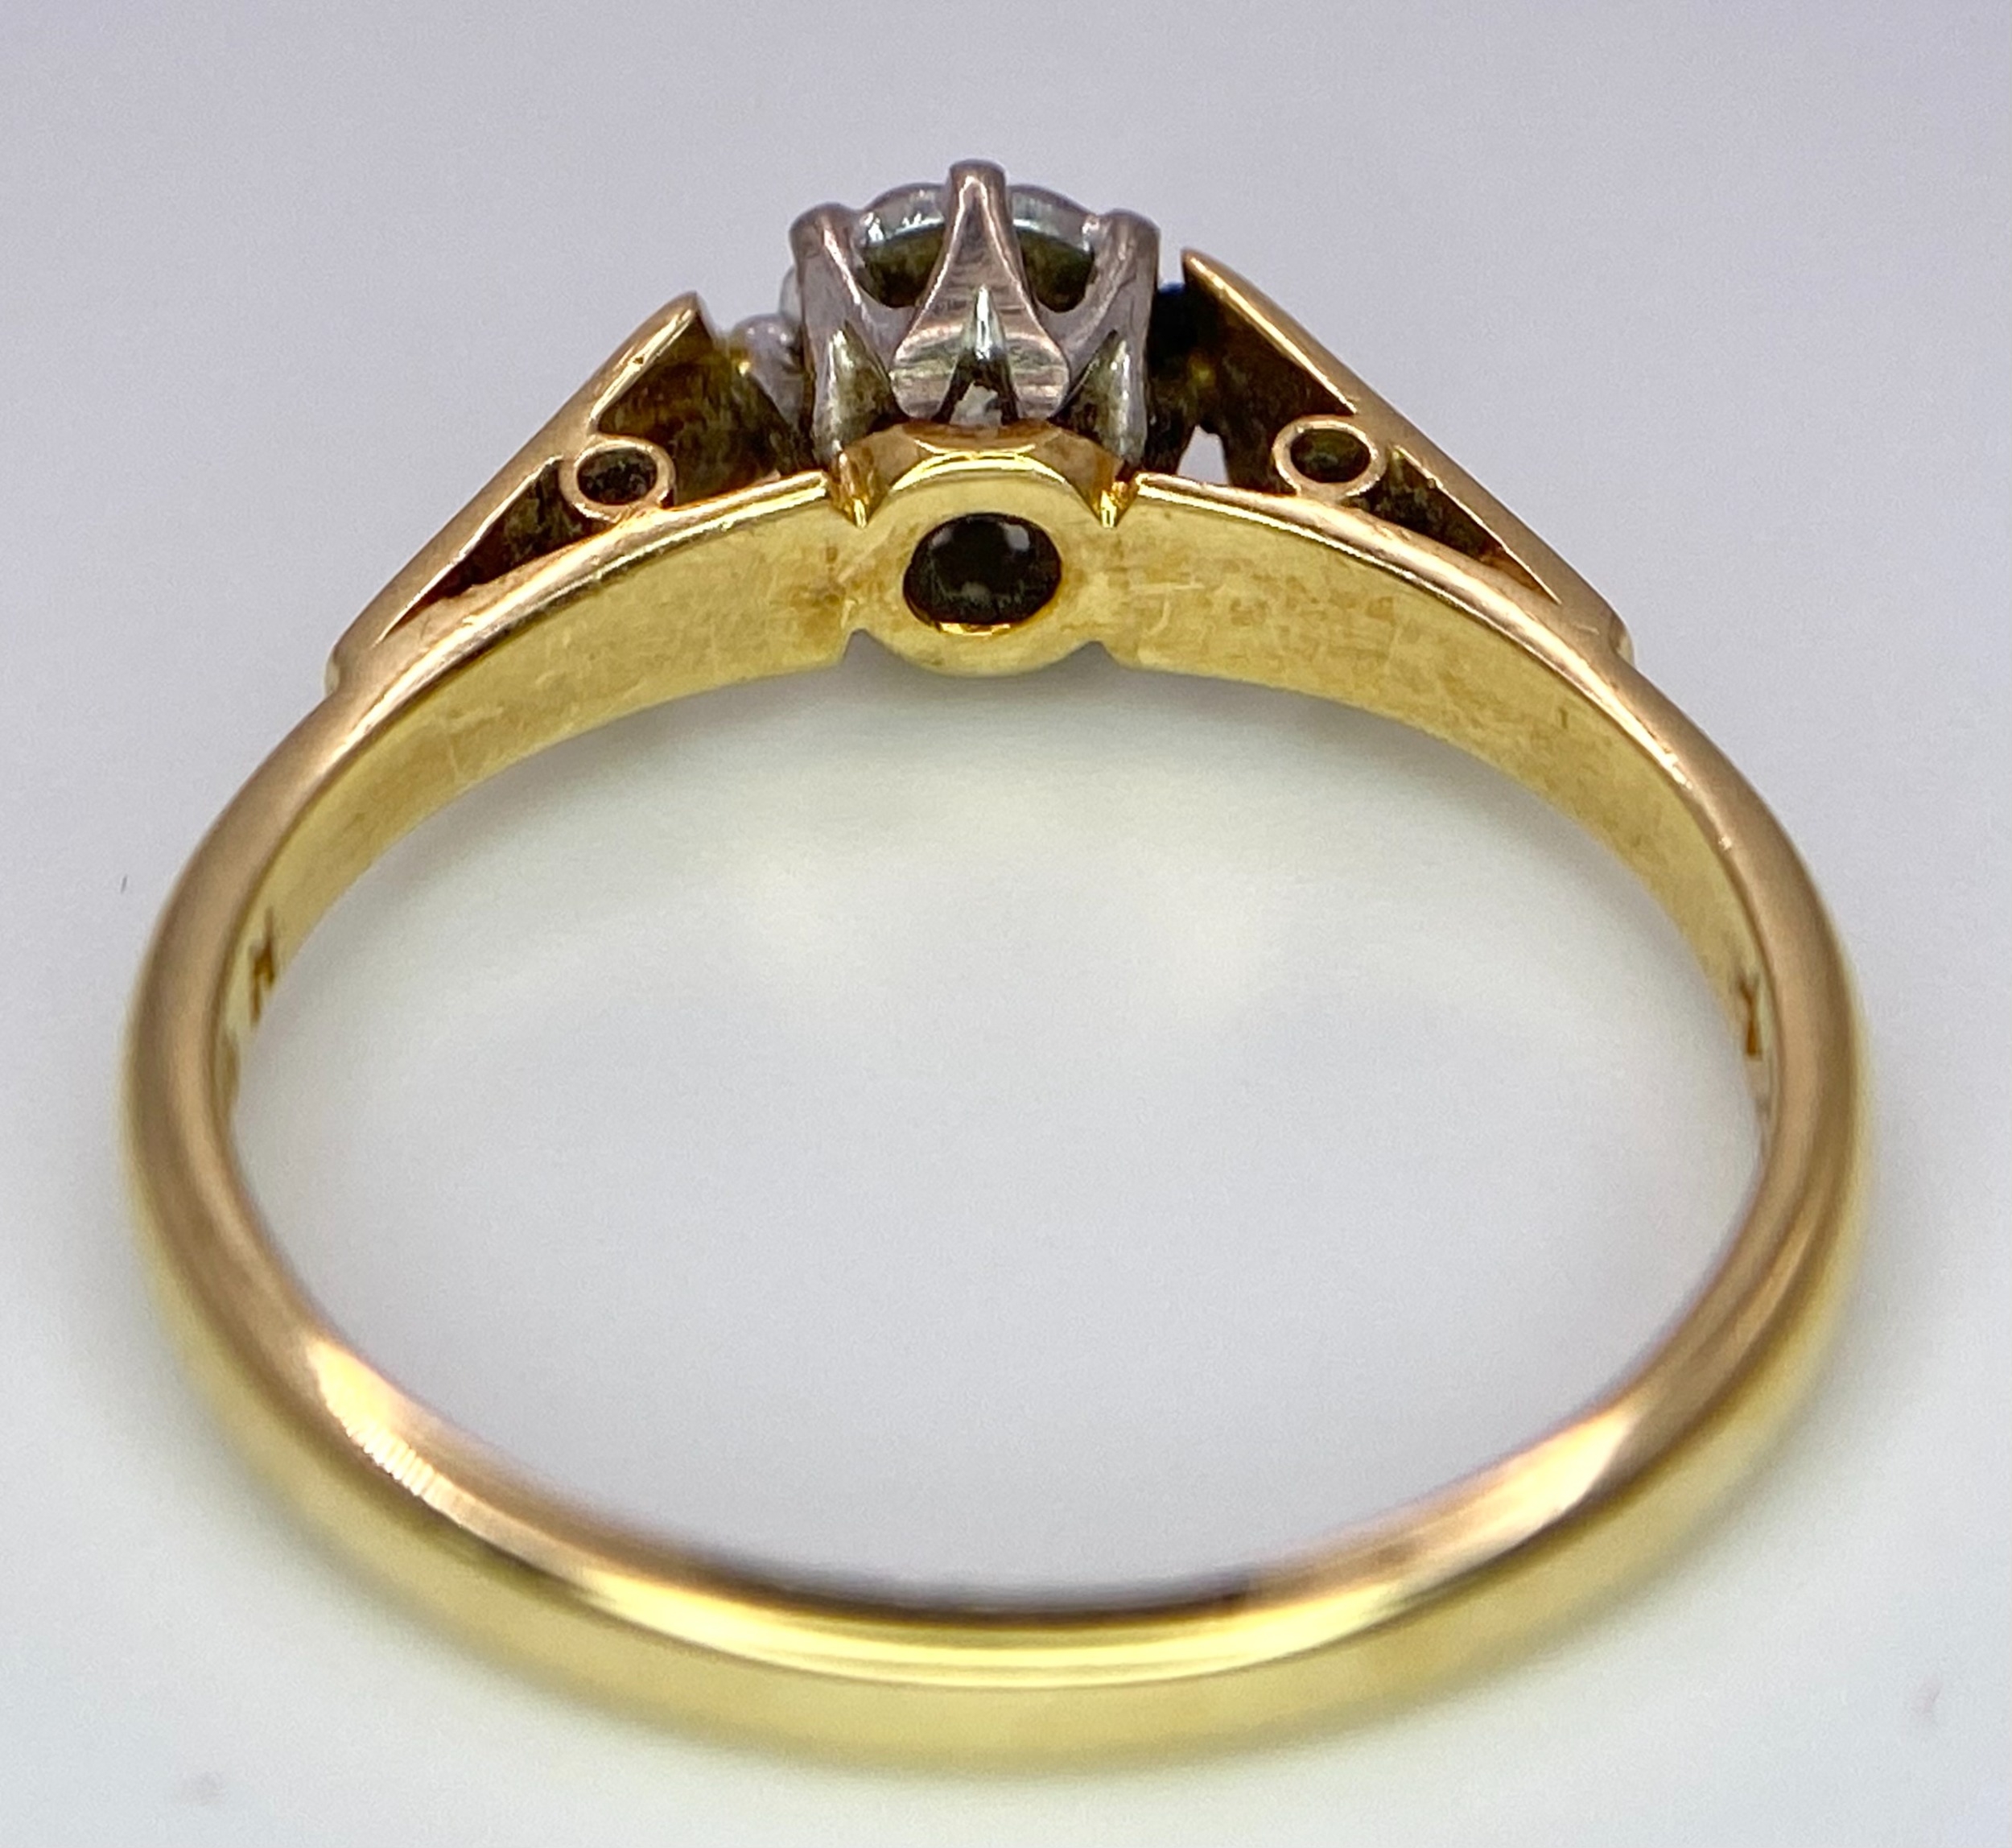 A VINTAGE 18K YELLOW GOLD DIAMOND SOLITAIRE RING. 0.15CT. 2.6G. SIZE L 1/2. - Image 4 of 6